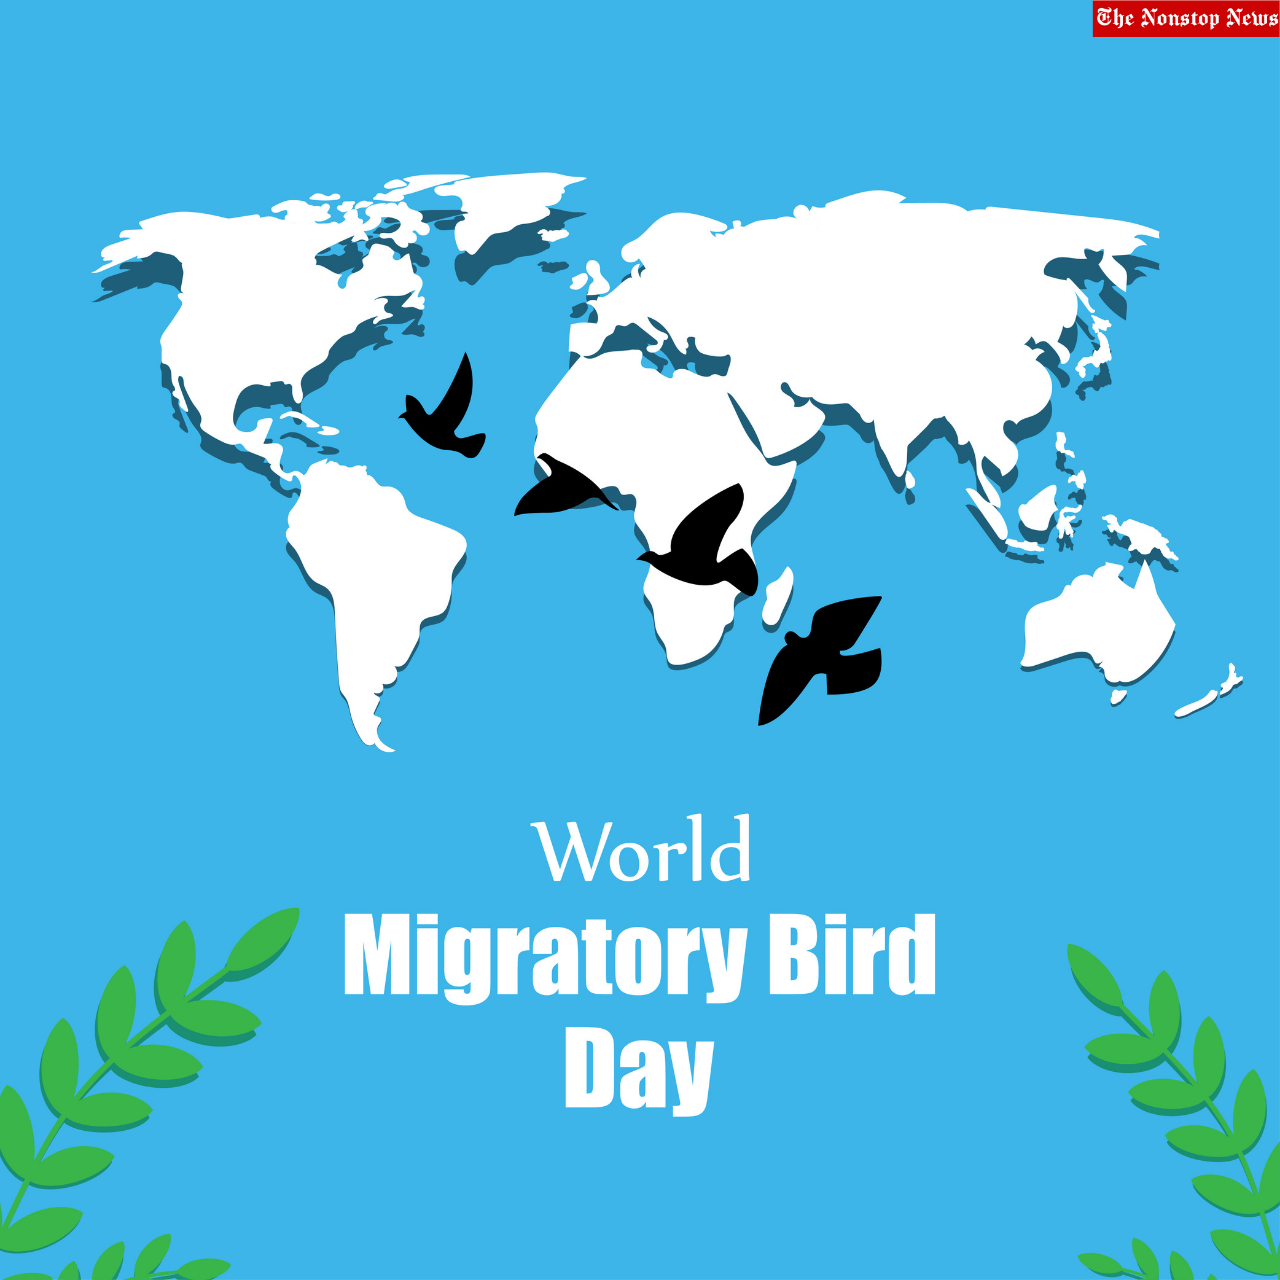 World Migratory Bird Day 2022: Current Theme, Quotes, Posters, Slogans, Messages, HD Images To Share